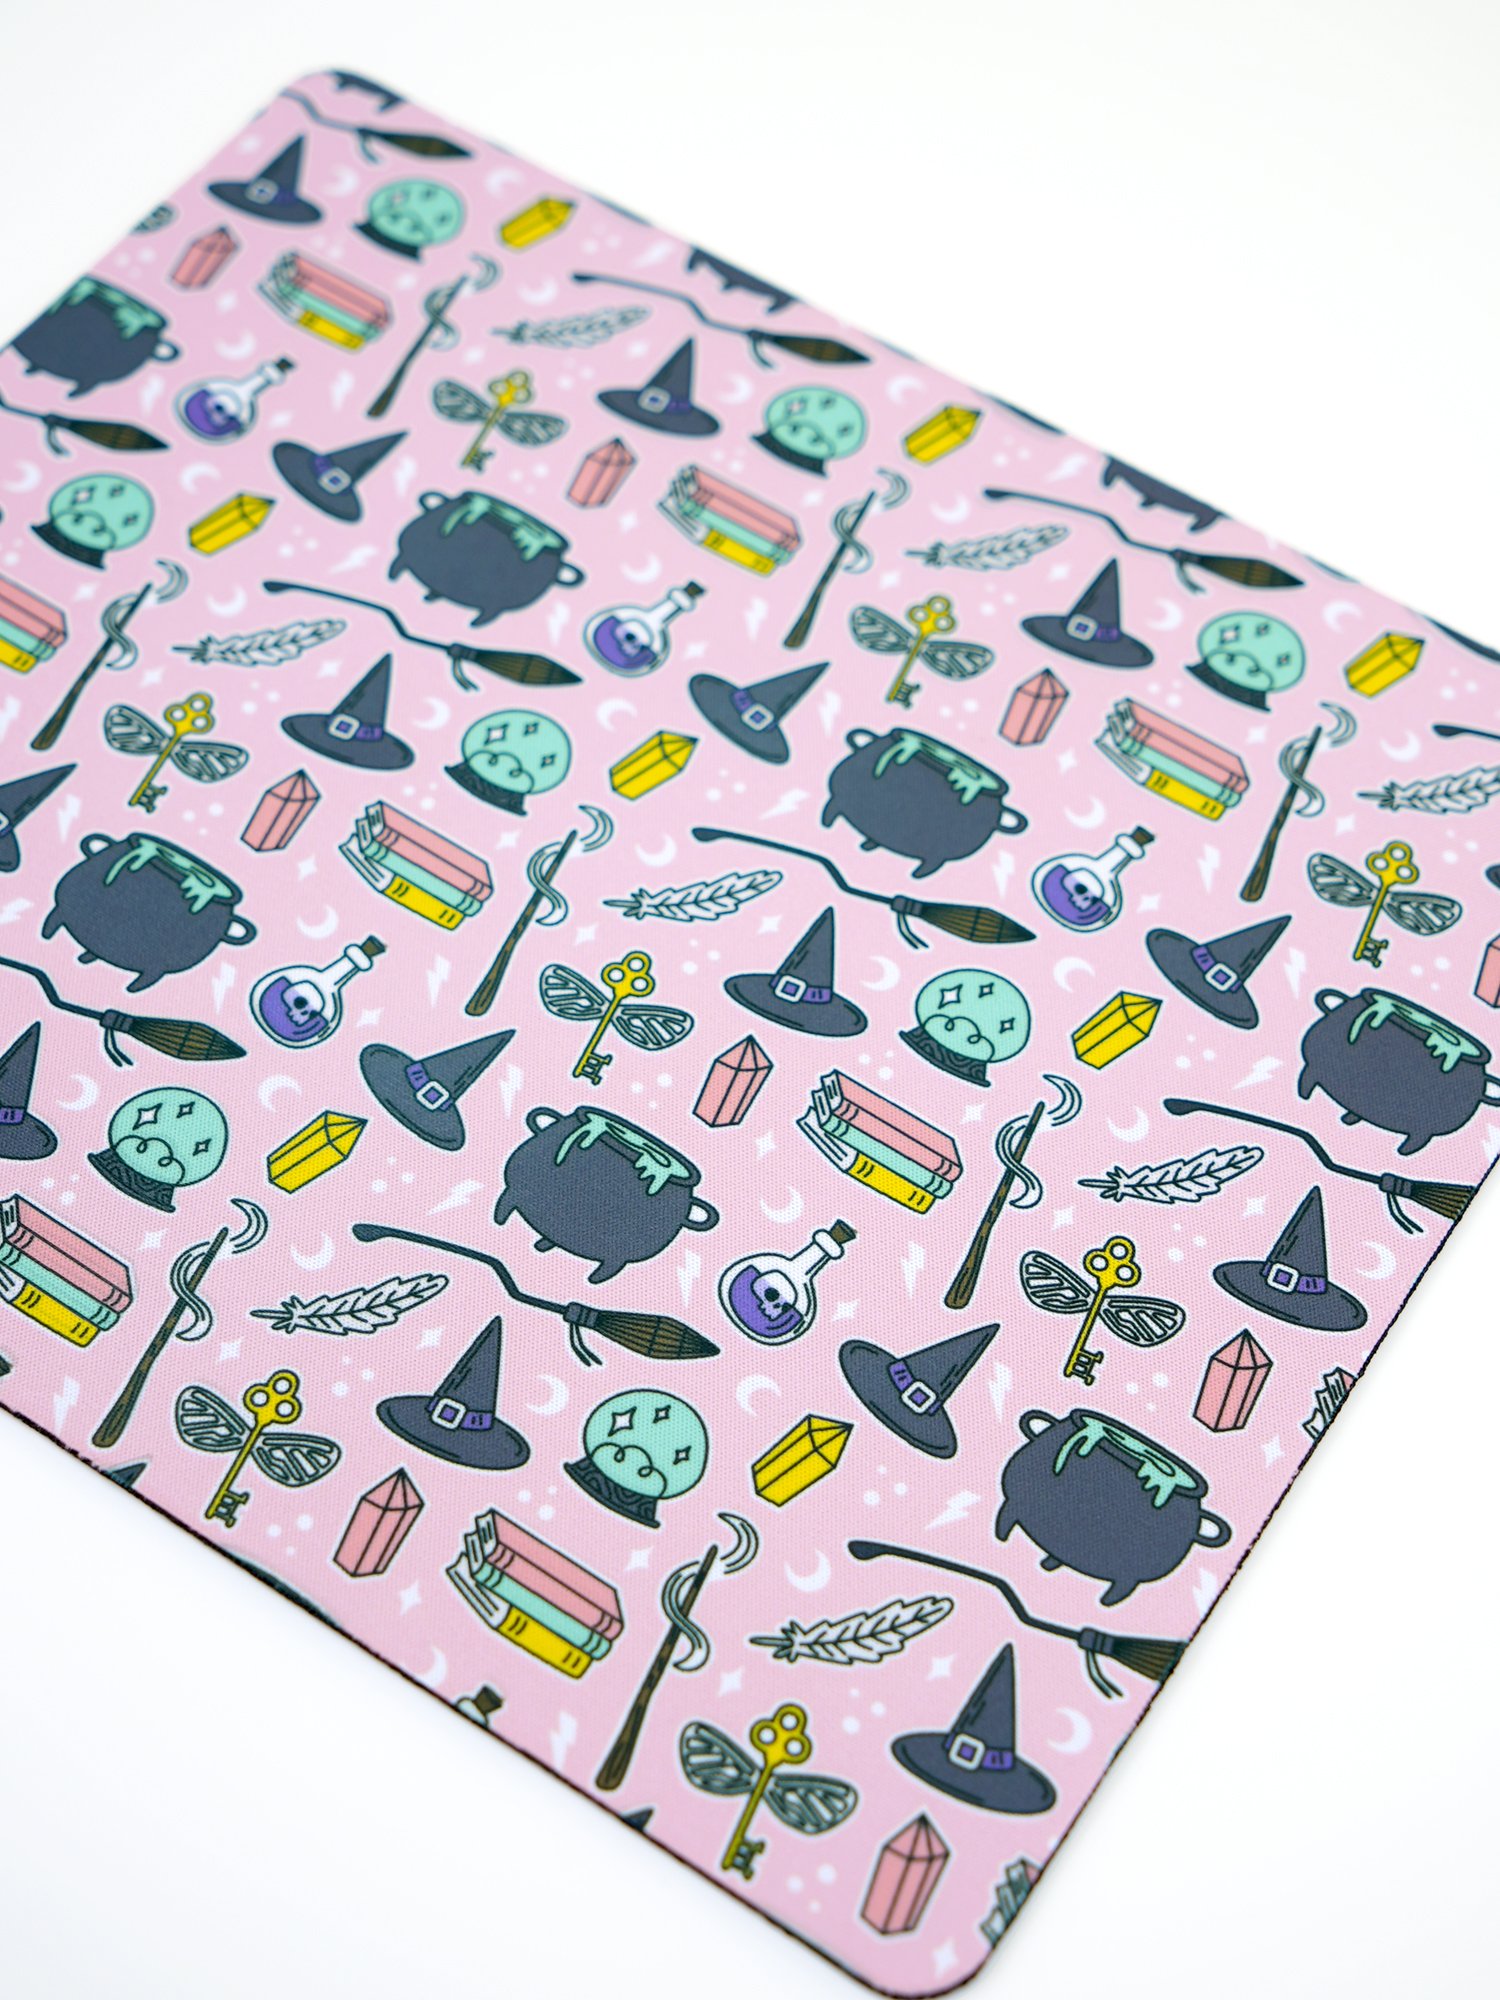 Close up of pink sublimated mouse pad with wizard icons and motifs